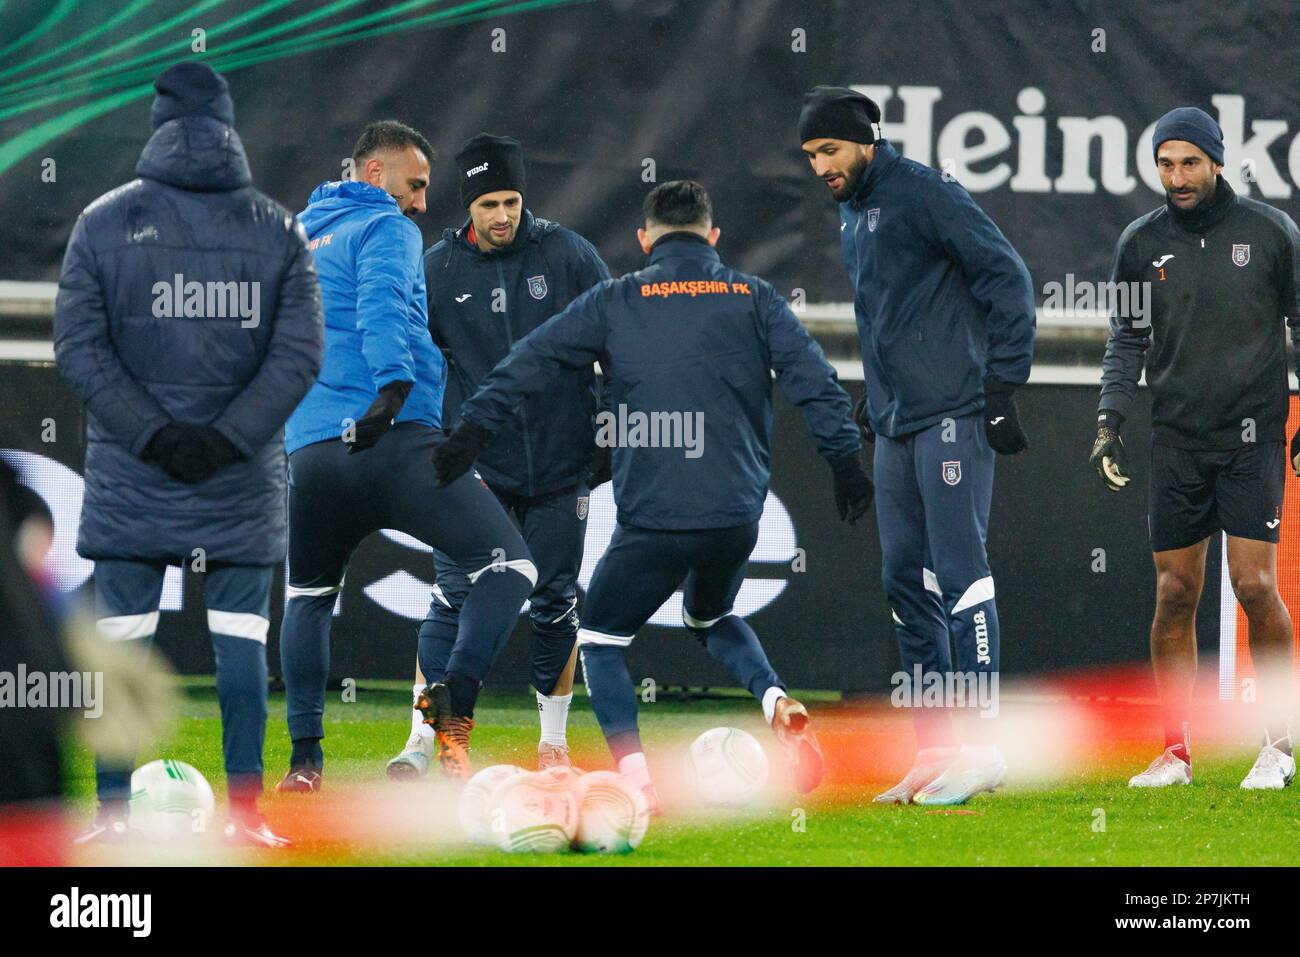 Basaksehir's Adnan Januzaj pictured during a training session of Turkish soccer team Istanbul Basaksehir FK on Wednesday 08 March 2023 in Gent. The team is preparing for tomorrow's game against Belgian KAA Gent, the first leg of the round of 16 of the UEFA Europa Conference League competition. BELGA PHOTO KURT DESPLENTER Stock Photo